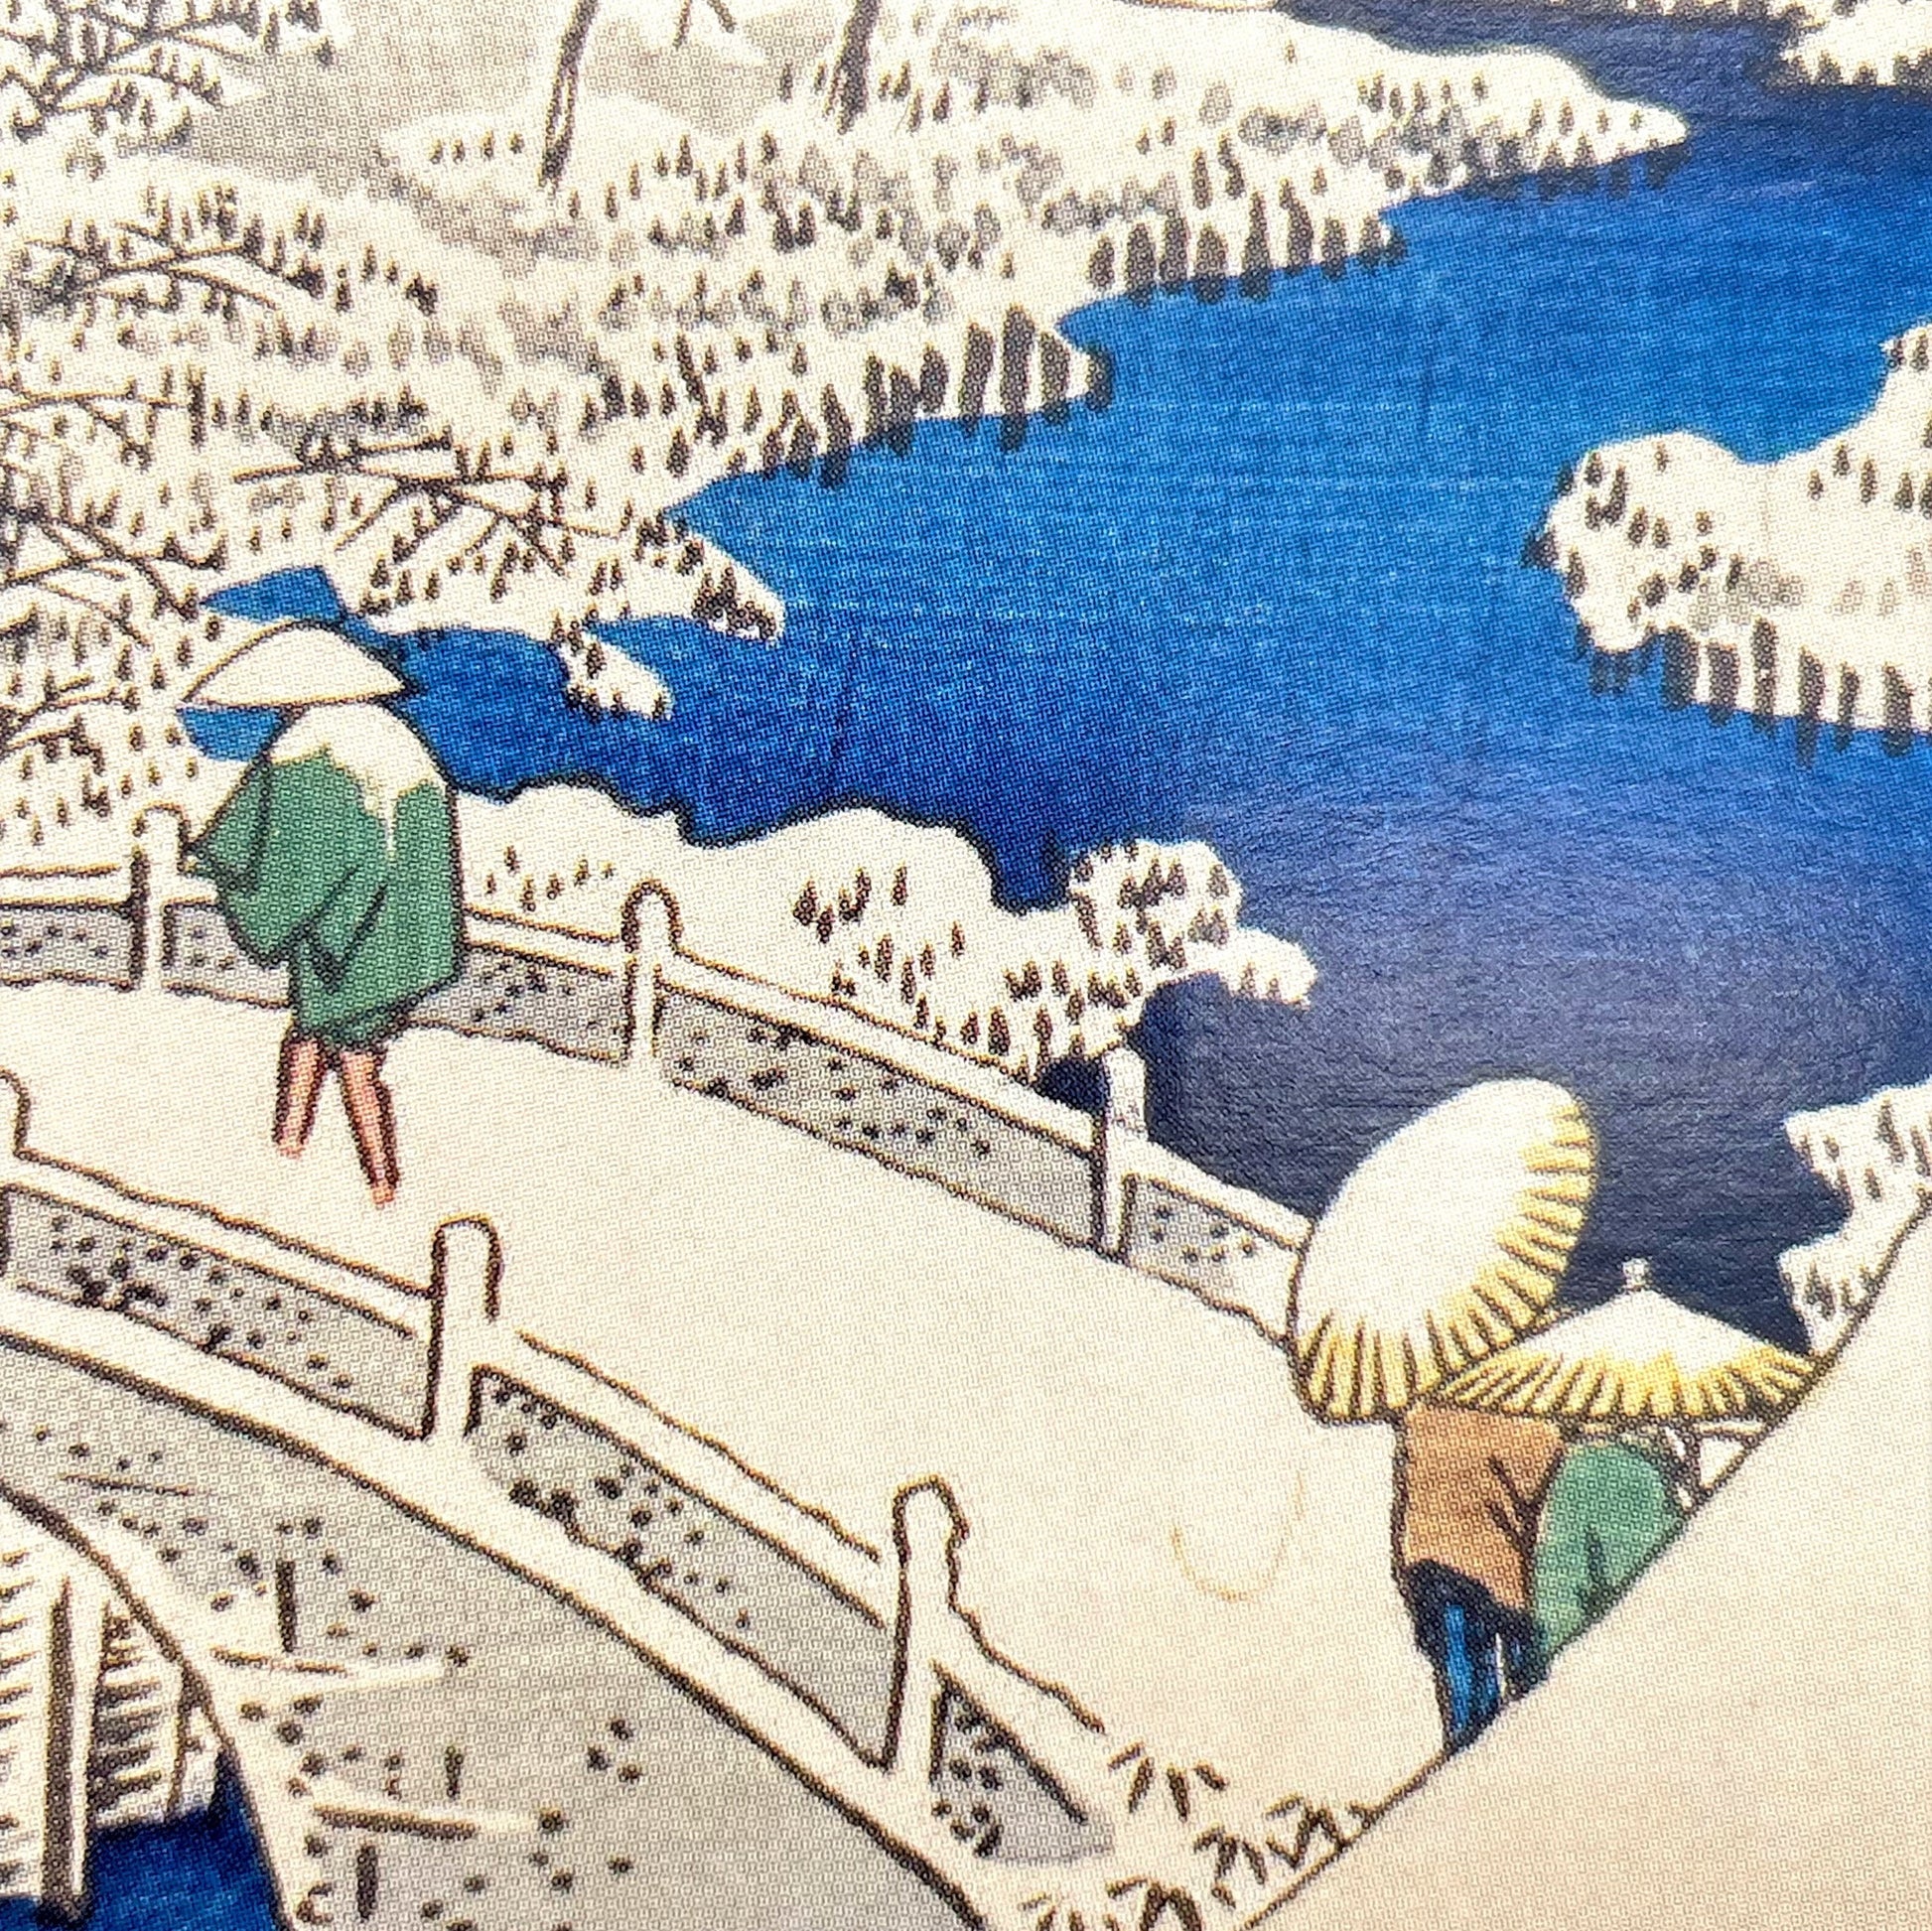 greetings card of yuhi hill and drum bridge at meguro in the snow, close-up of the bridge